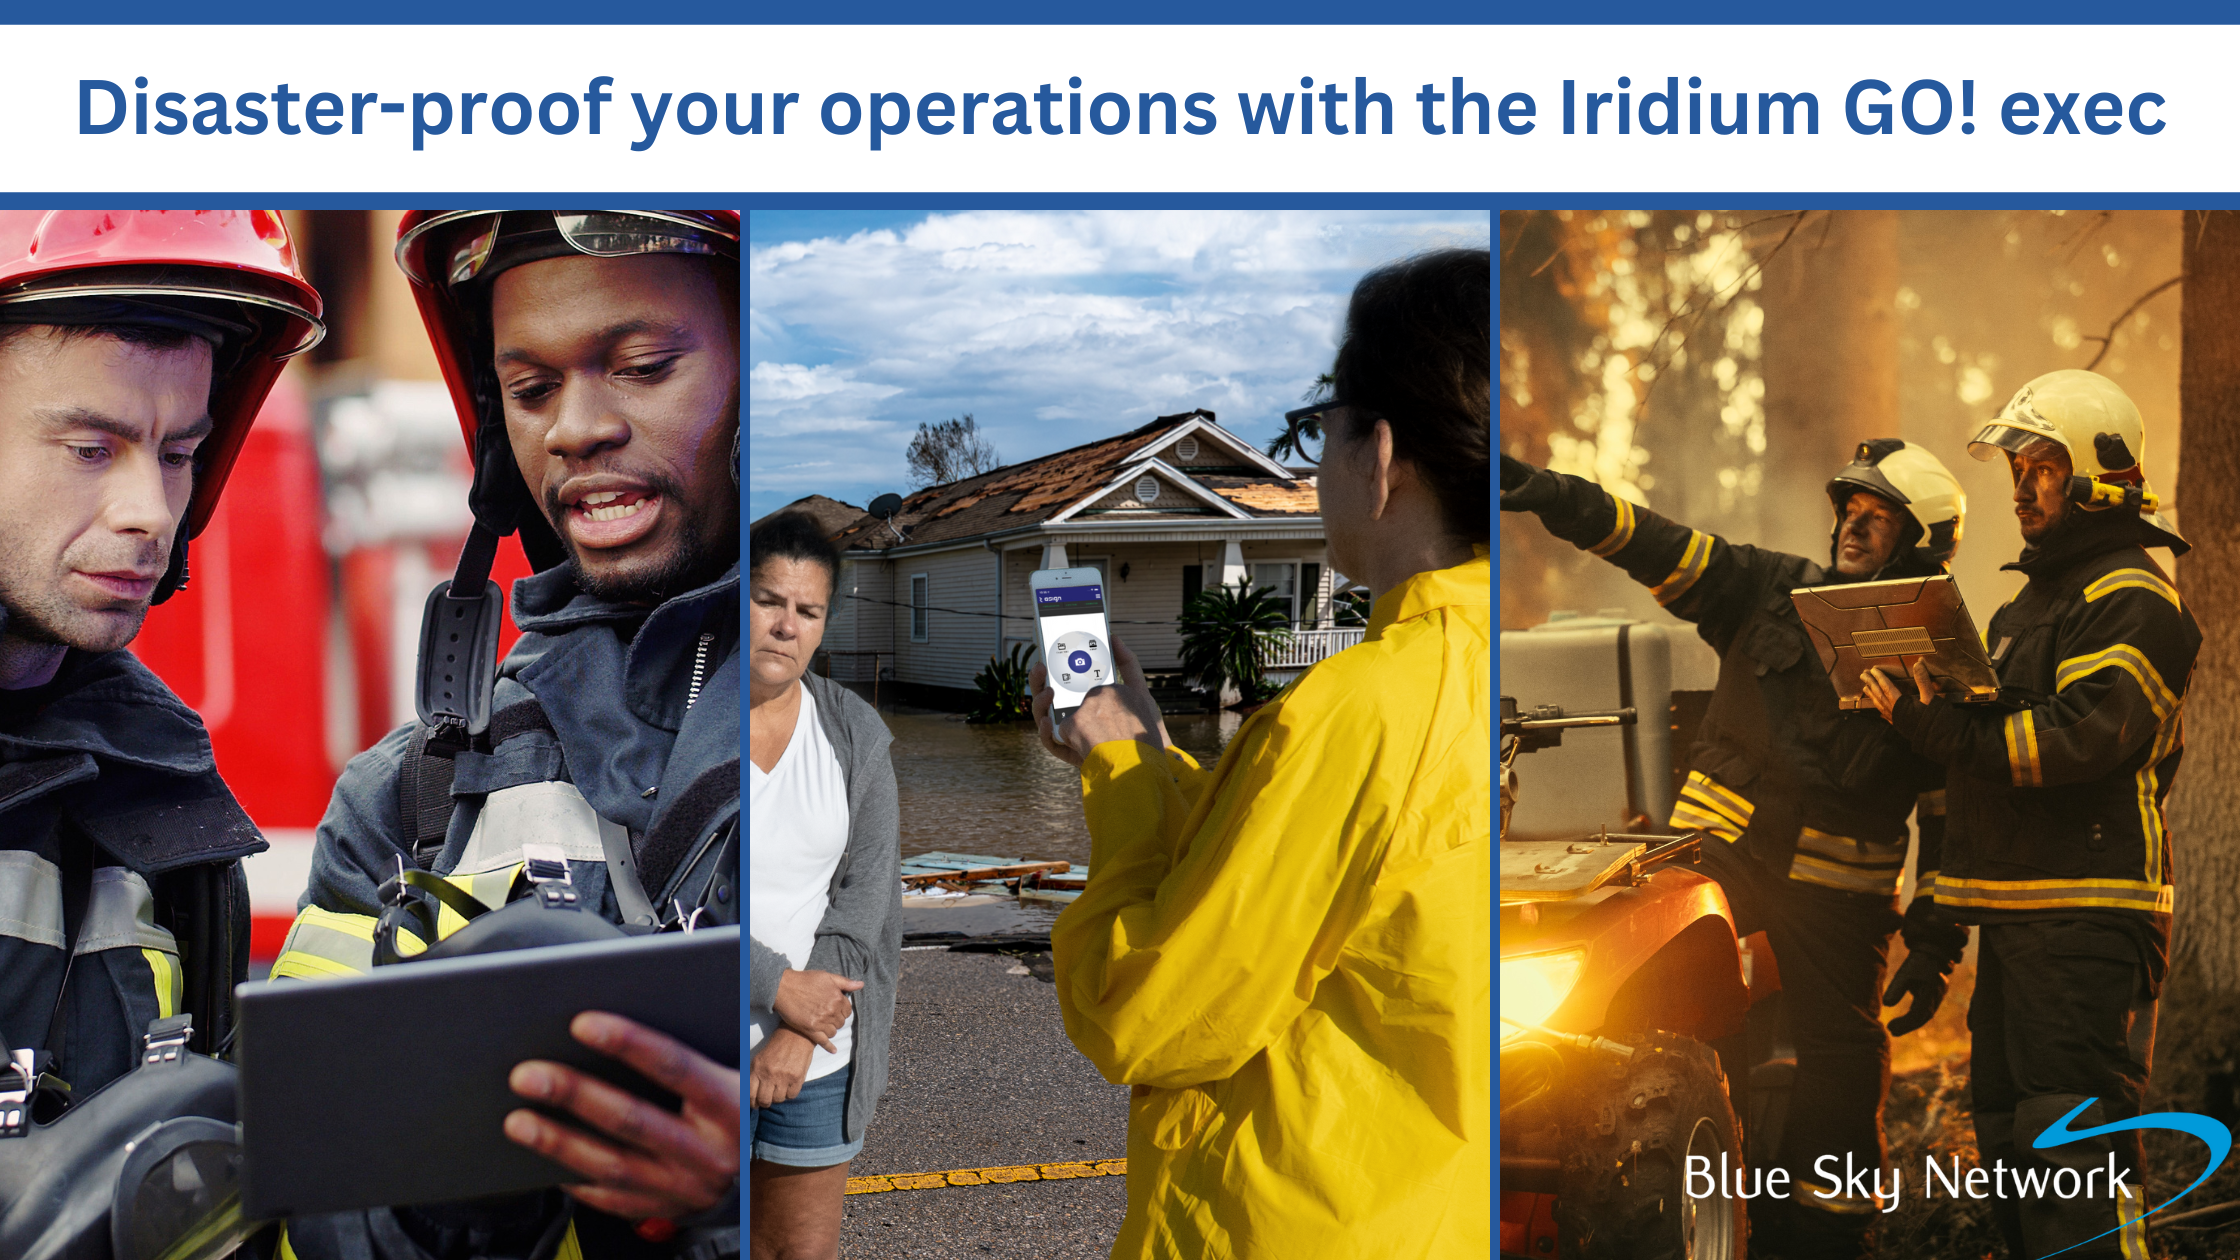 Firefighters and emergency response worker on smart devices powered by the Iridium GO! exec